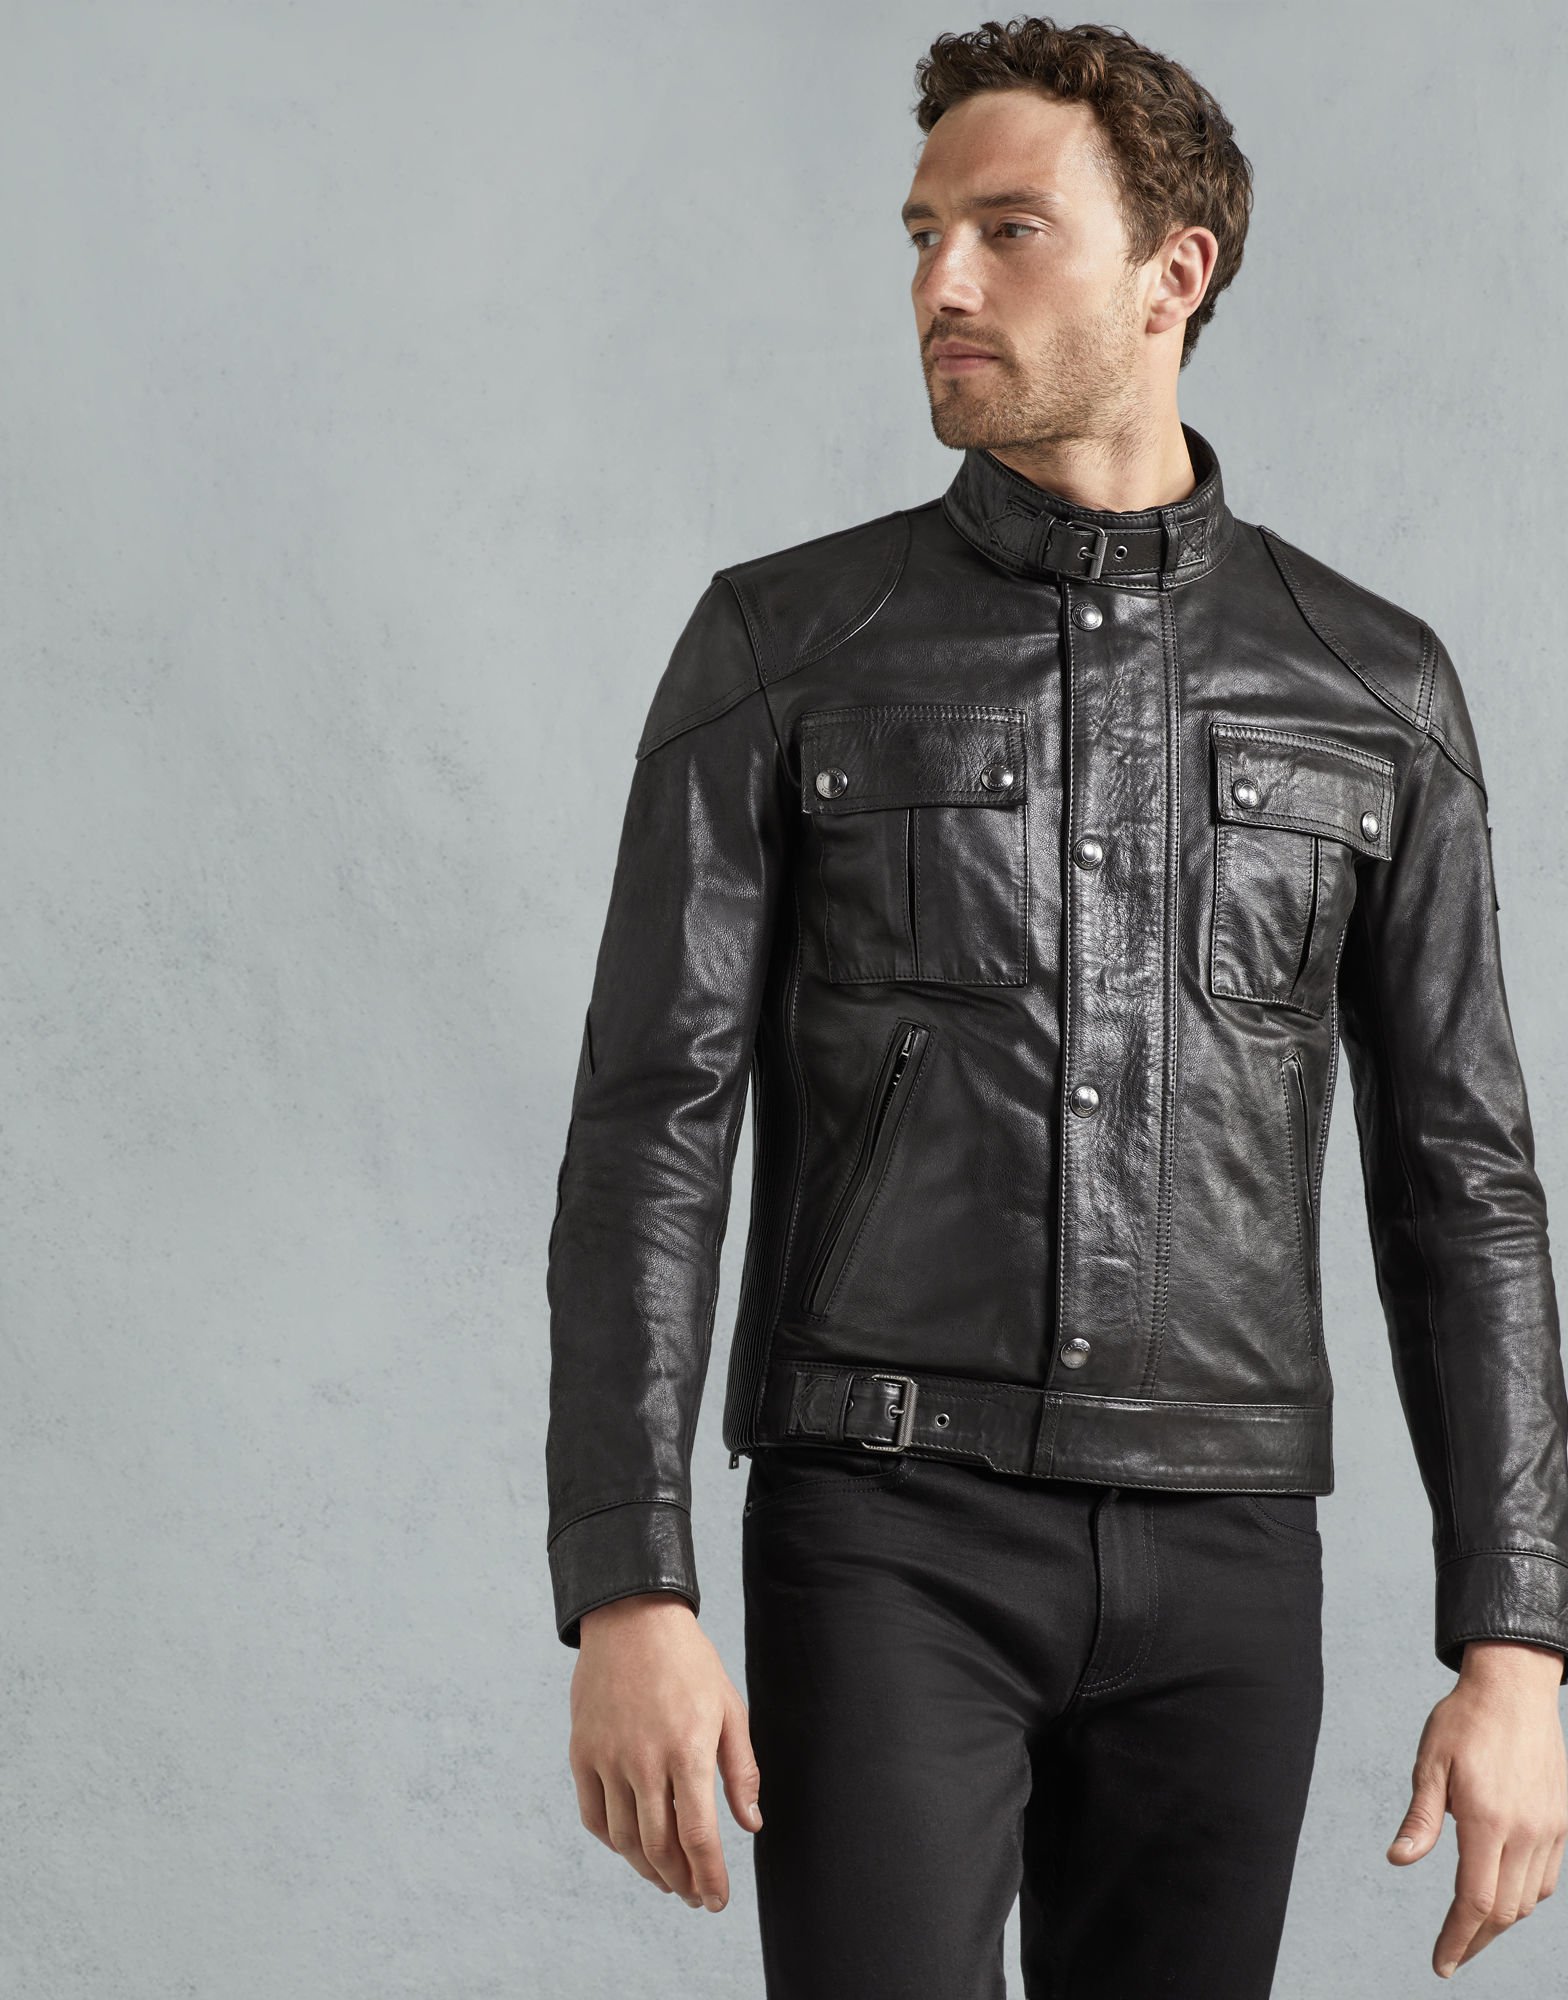 BELSTAFF Leather Jackets- exclusive designer fashion for style-conscious and trendsetters